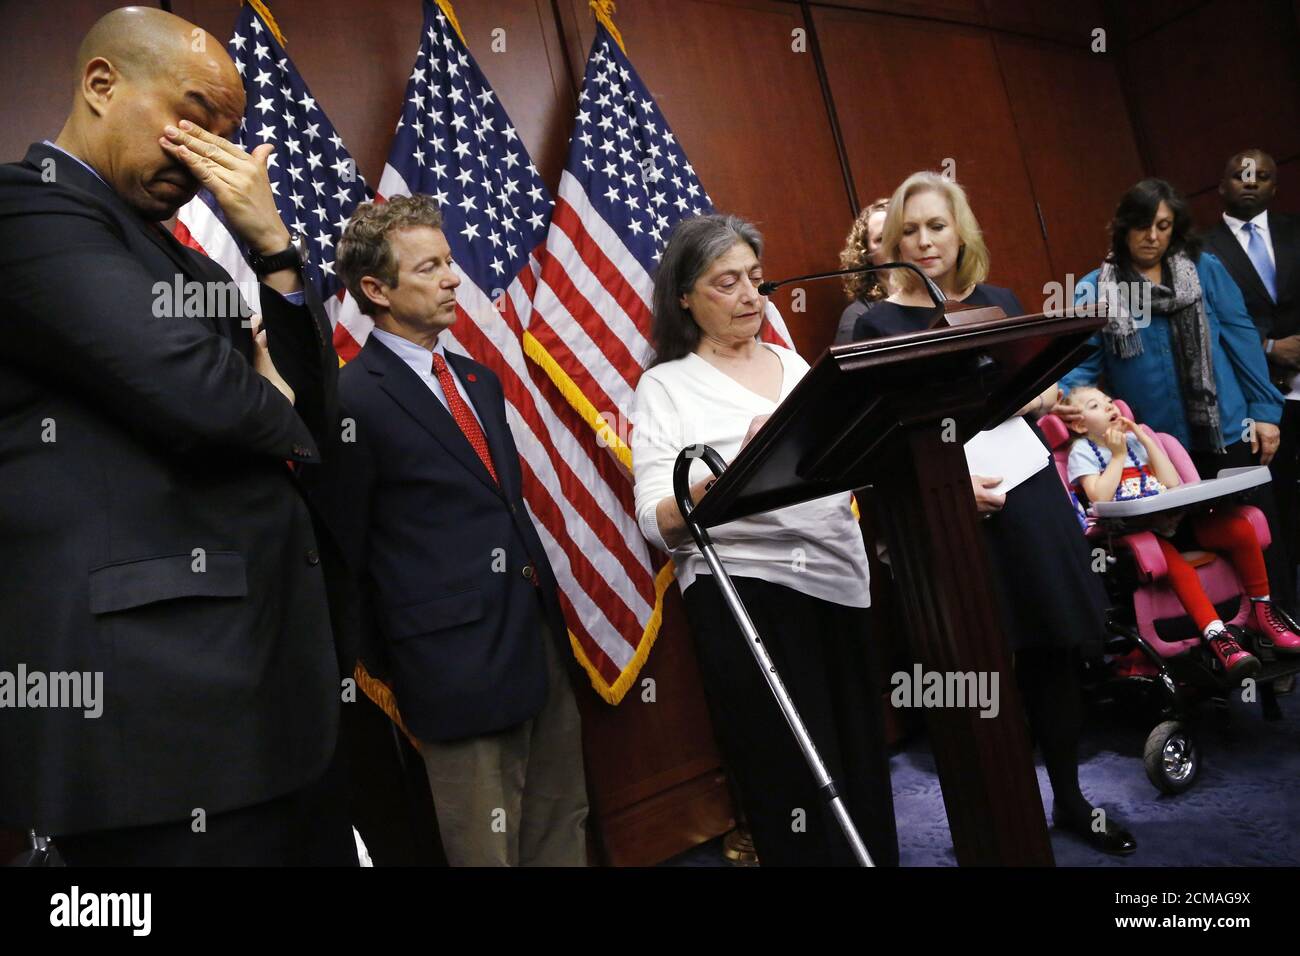 U.S. Senator Cory Booker (D-NJ) (L) wipes away tears as Sandy Faiola (3rd L), a medical marijuana patient from New Jersey, tells her story at a news conference to introduce legislation that would prevent the federal government from prosecuting medical marijuana users in states where it is legal, at the U.S. Capitol in Washington, March 10, 2015. Also pictured are the cosponsors of the legislation, Senator Rand Paul (R-KY) (2nd L) and Senator Kirsten Gillibrand (D-NY) (3rd R), as well as young epilepsy sufferer Morgan Jones (bottom R), age 4 of New York. REUTERS/Jonathan Ernst    (UNITED STATES Stock Photo